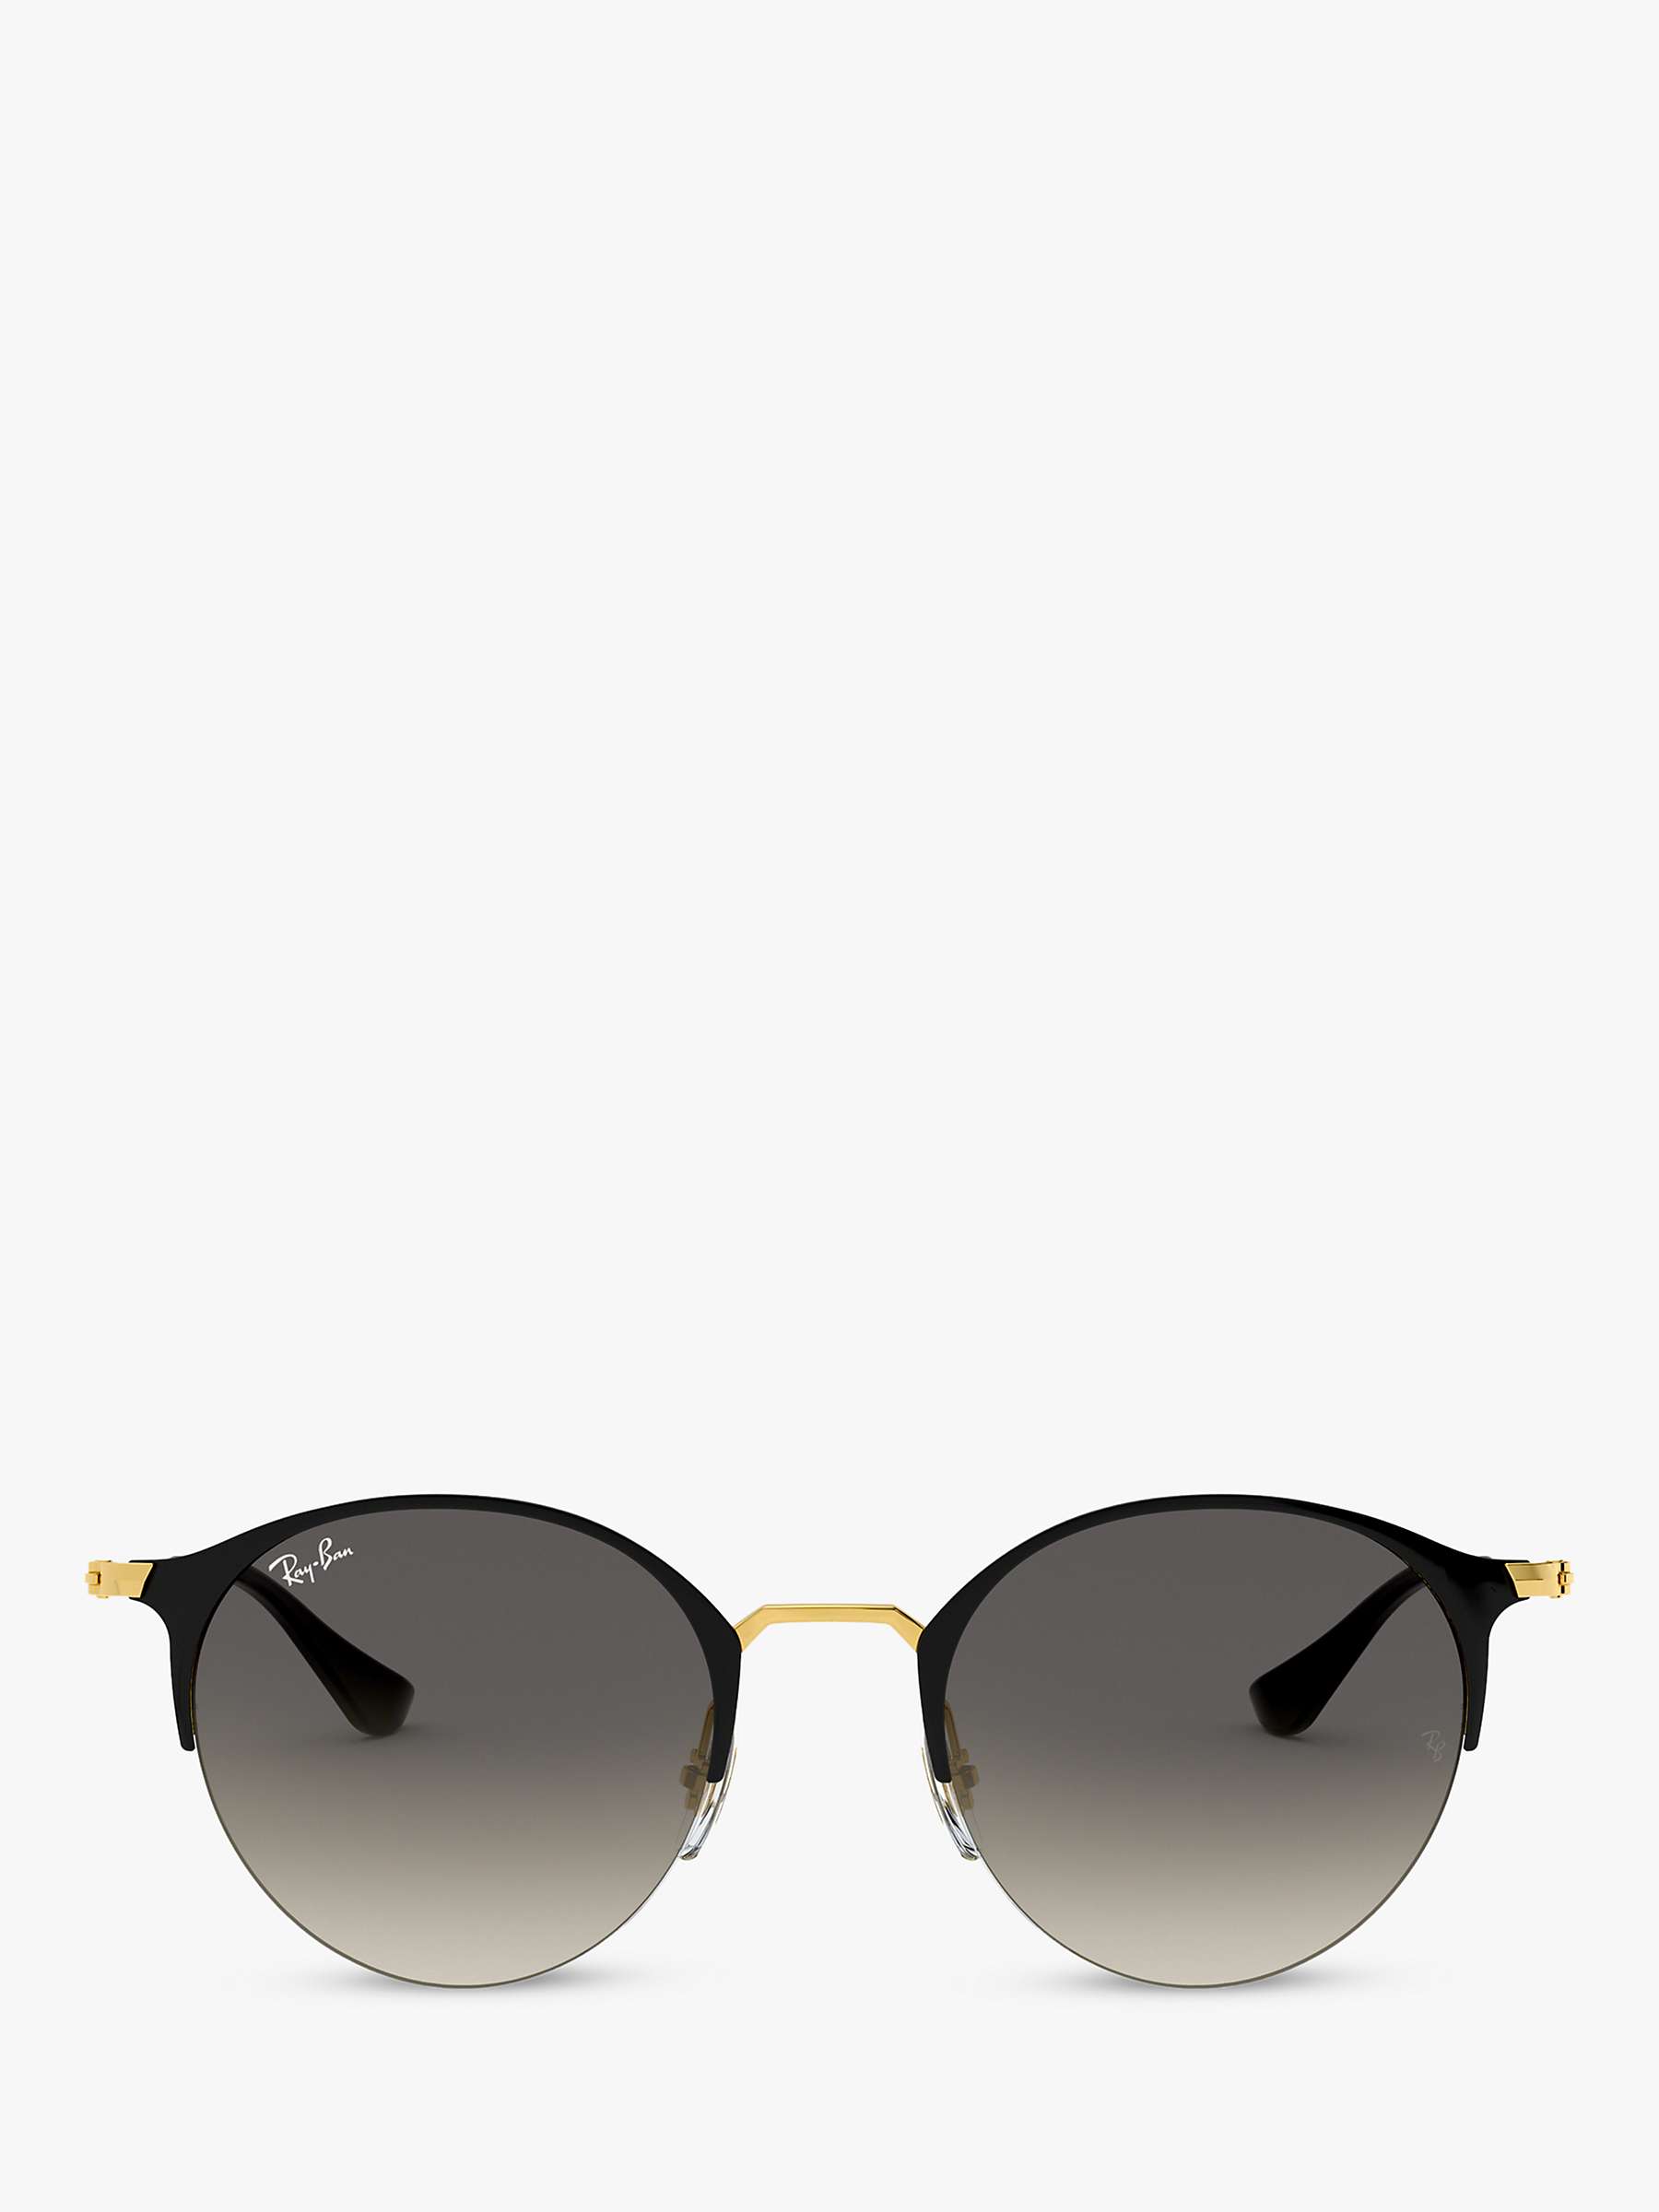 Buy Ray-Ban RB3578 Women's Oval Sunglasses, Black/Grey Gradient Online at johnlewis.com